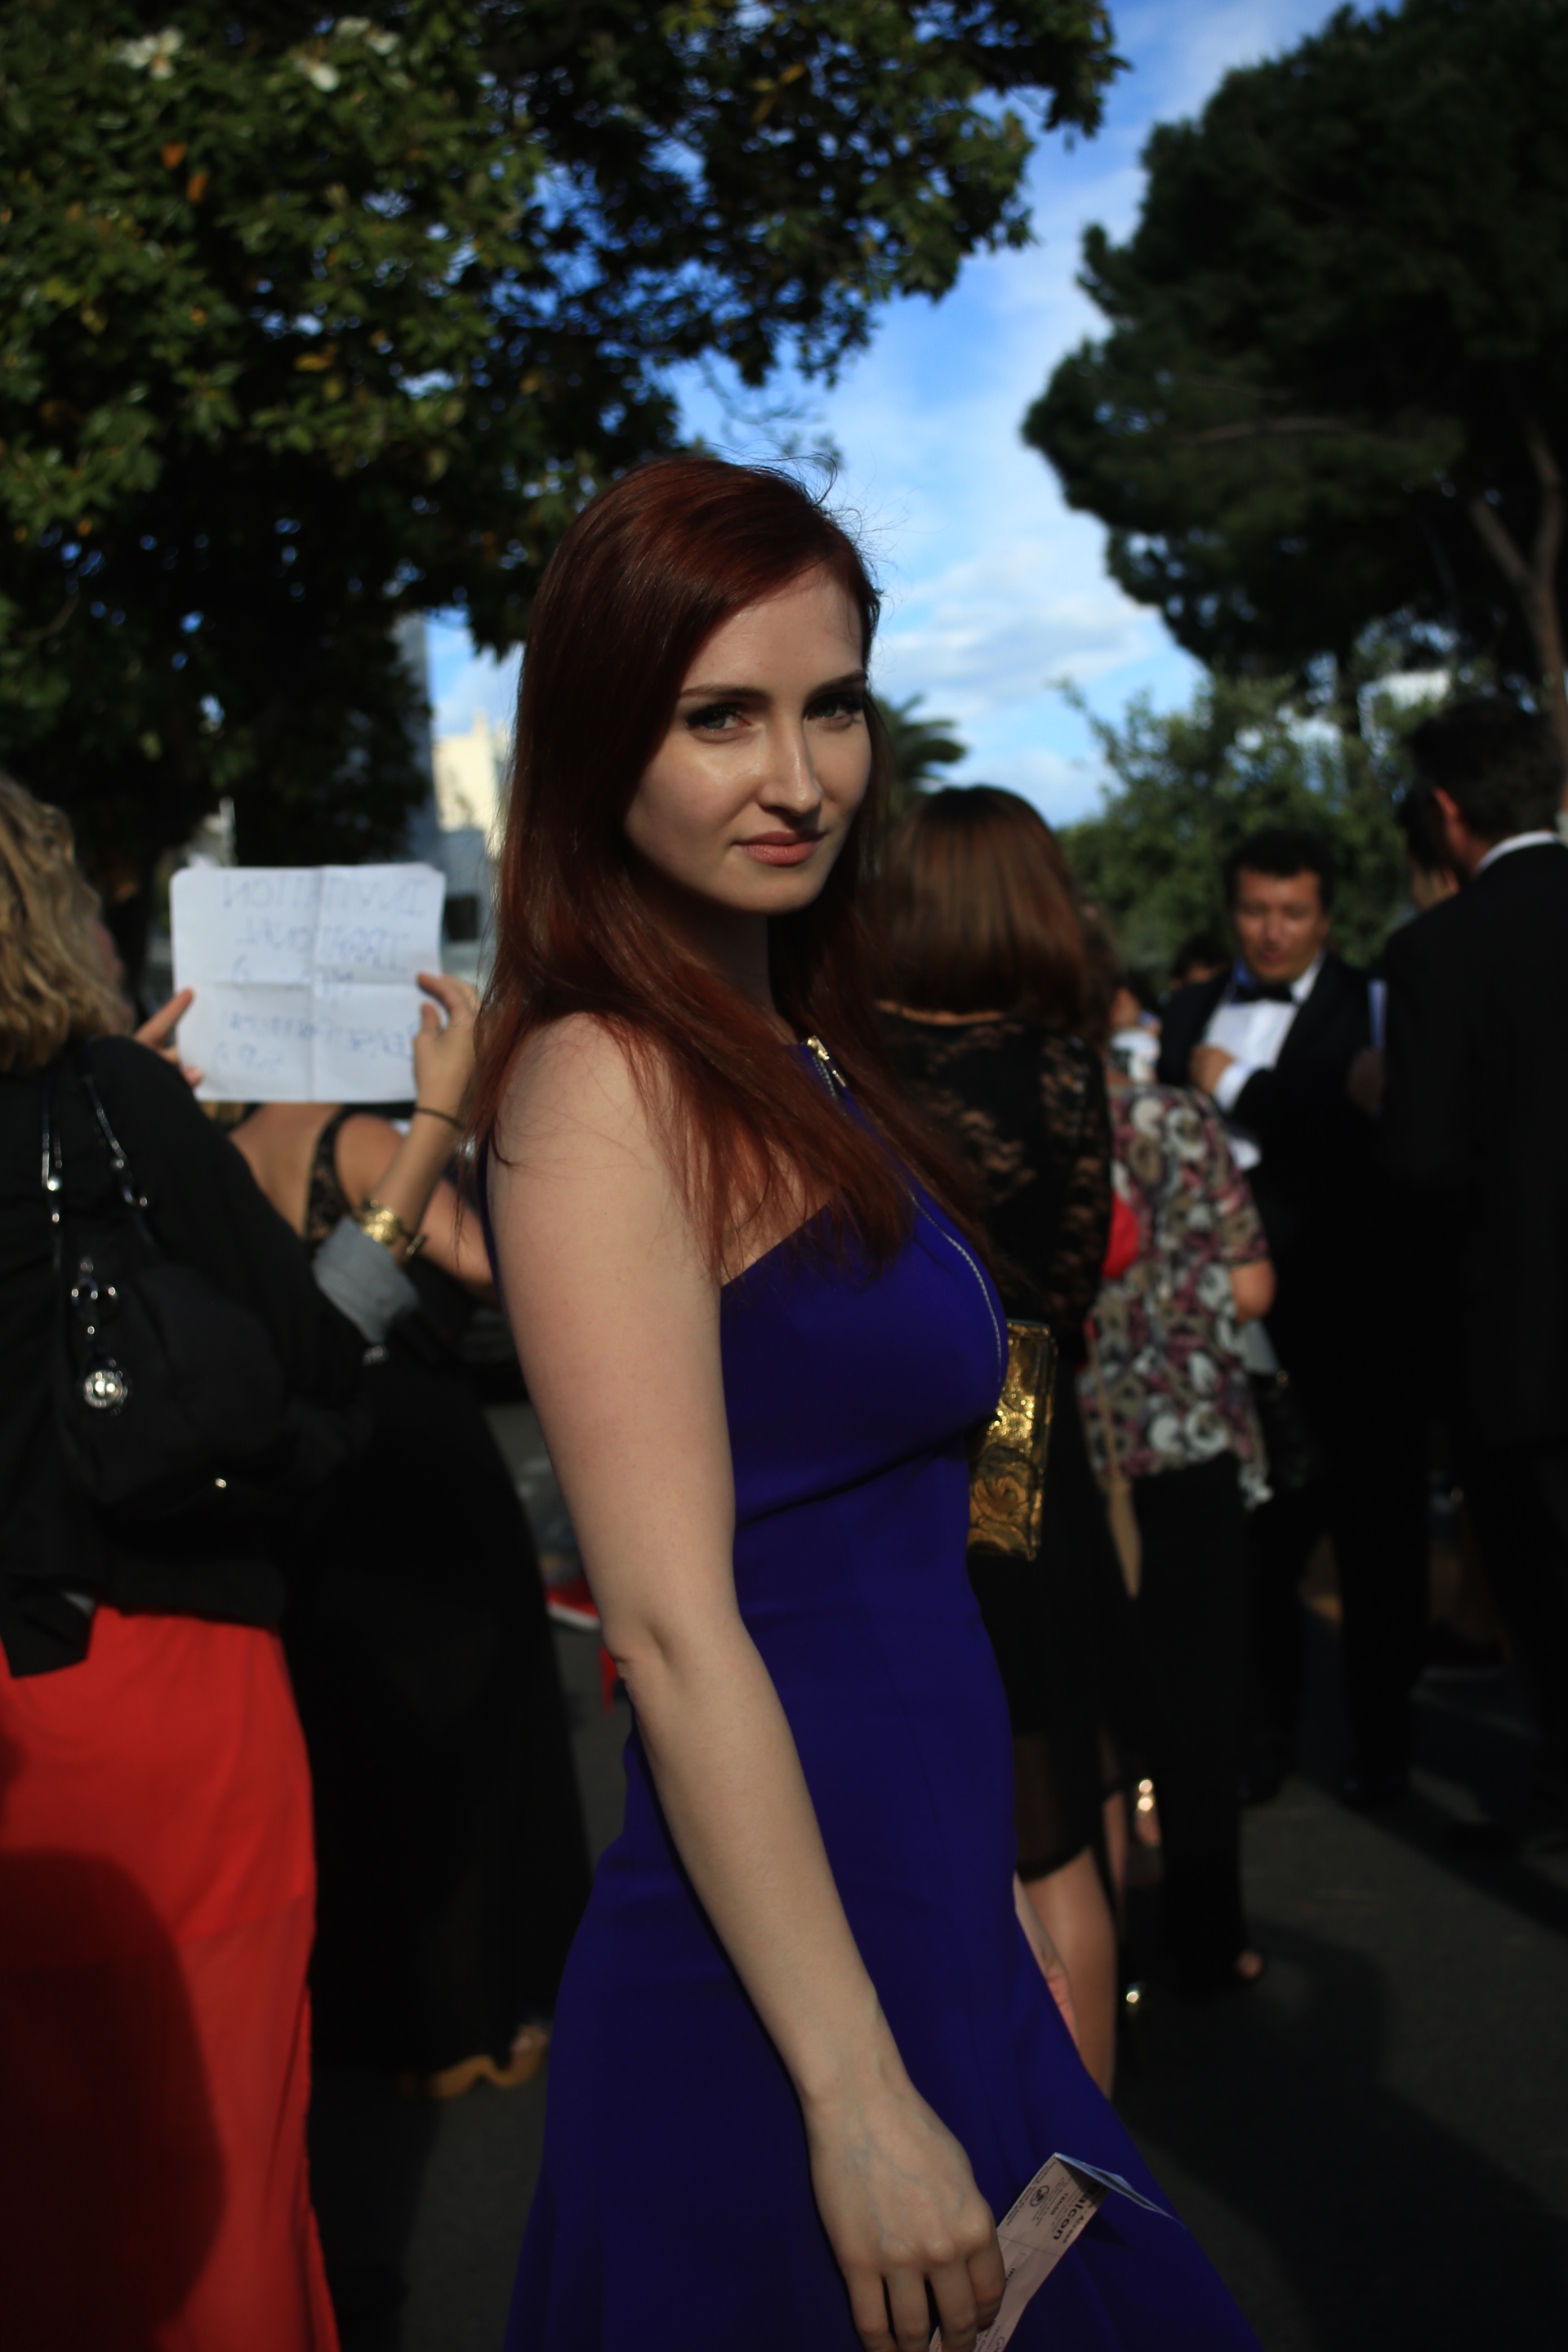 On the red carpet for the premiere of Woody Allen's The Irrational Man at the Cannes Film Festival.